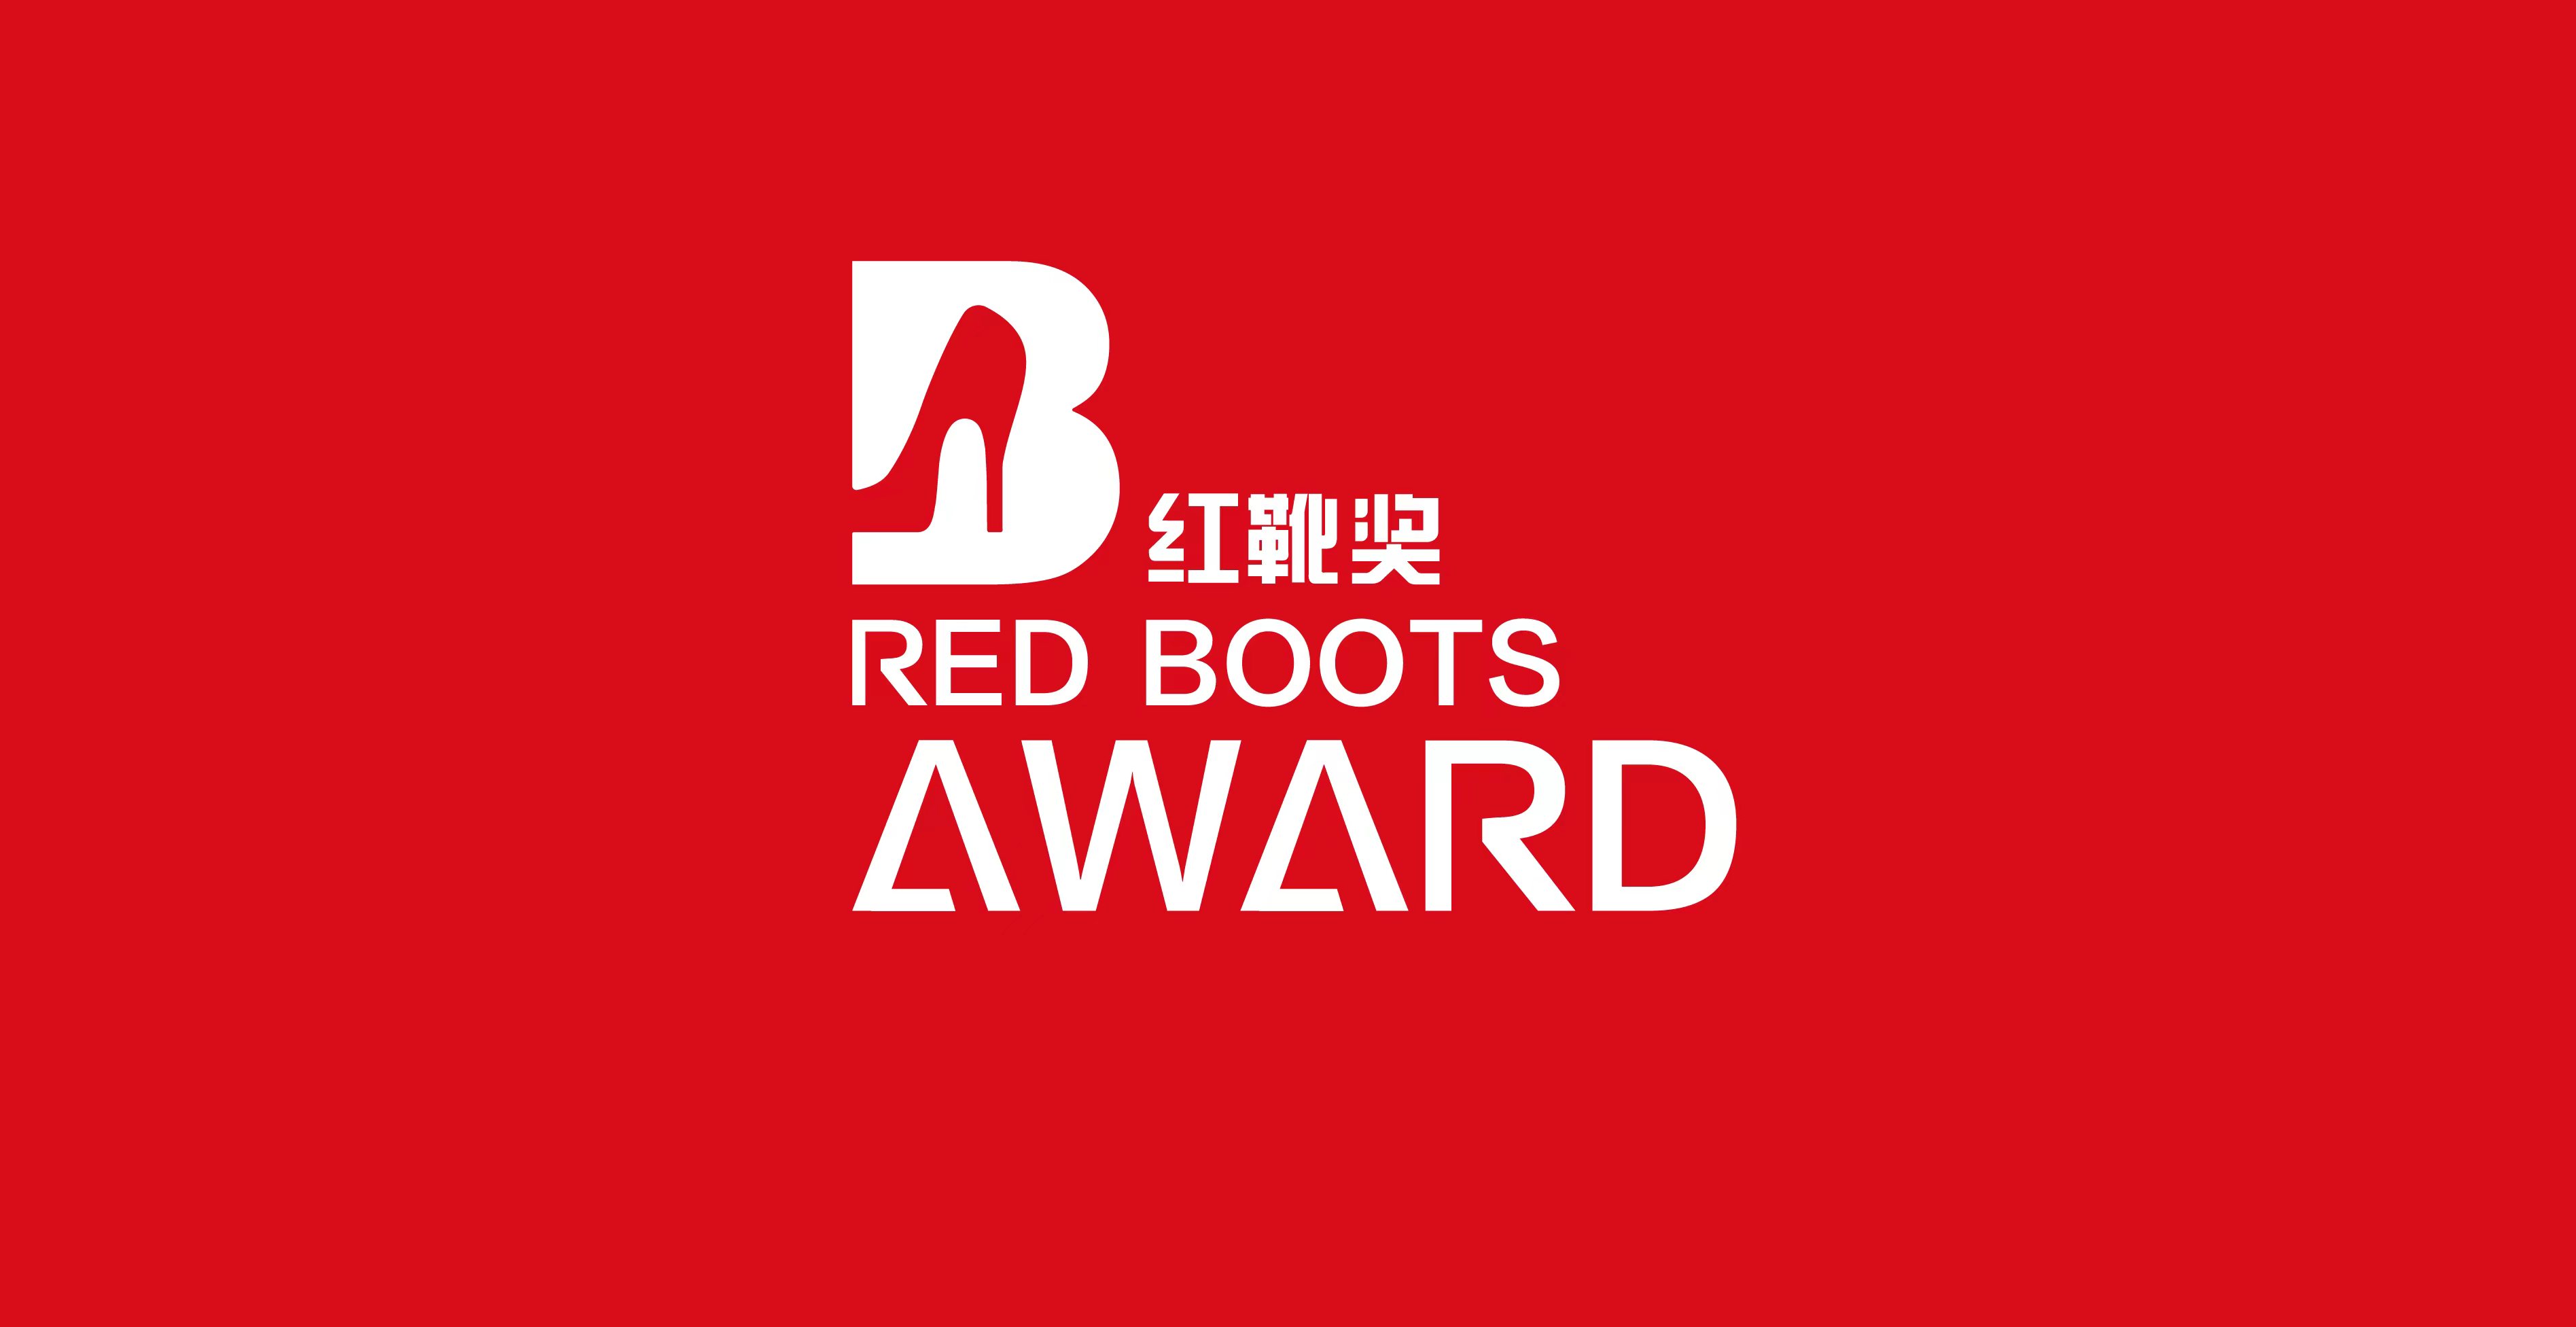 Red Boots Award